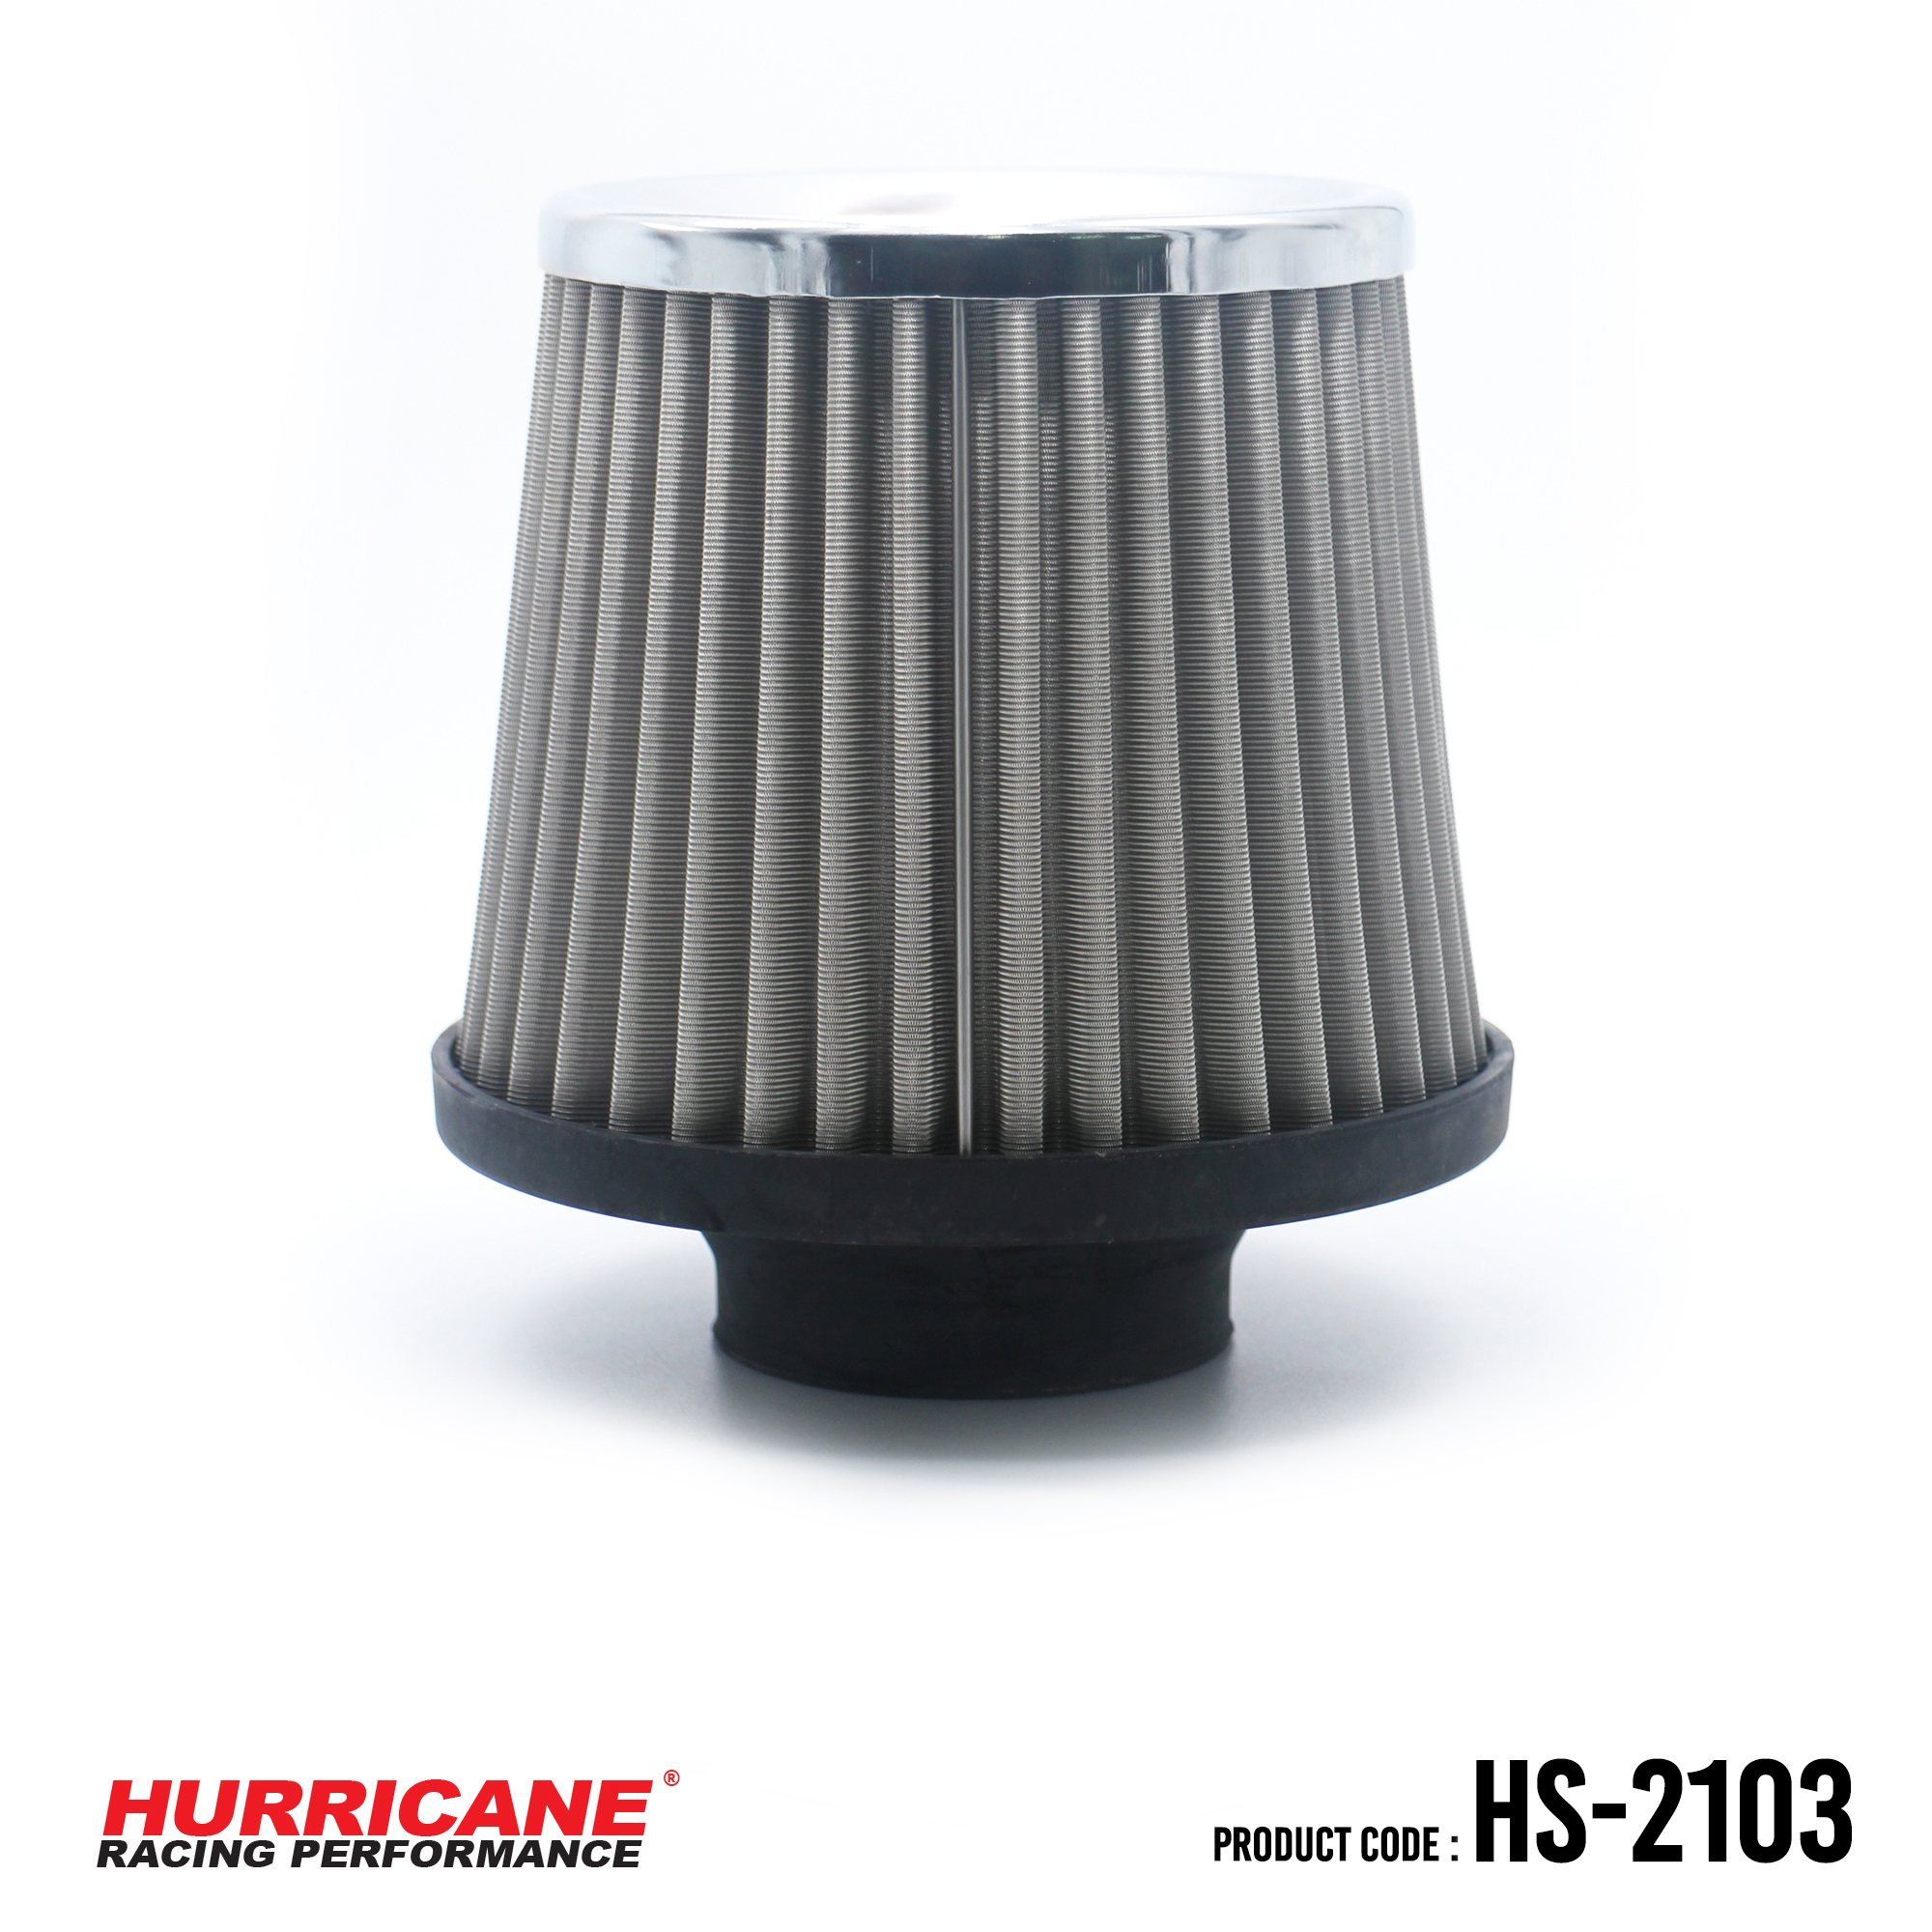 HURRICANE STAINLESS STEEL AIR FILTER FOR HS-2103 กรองเปลือย